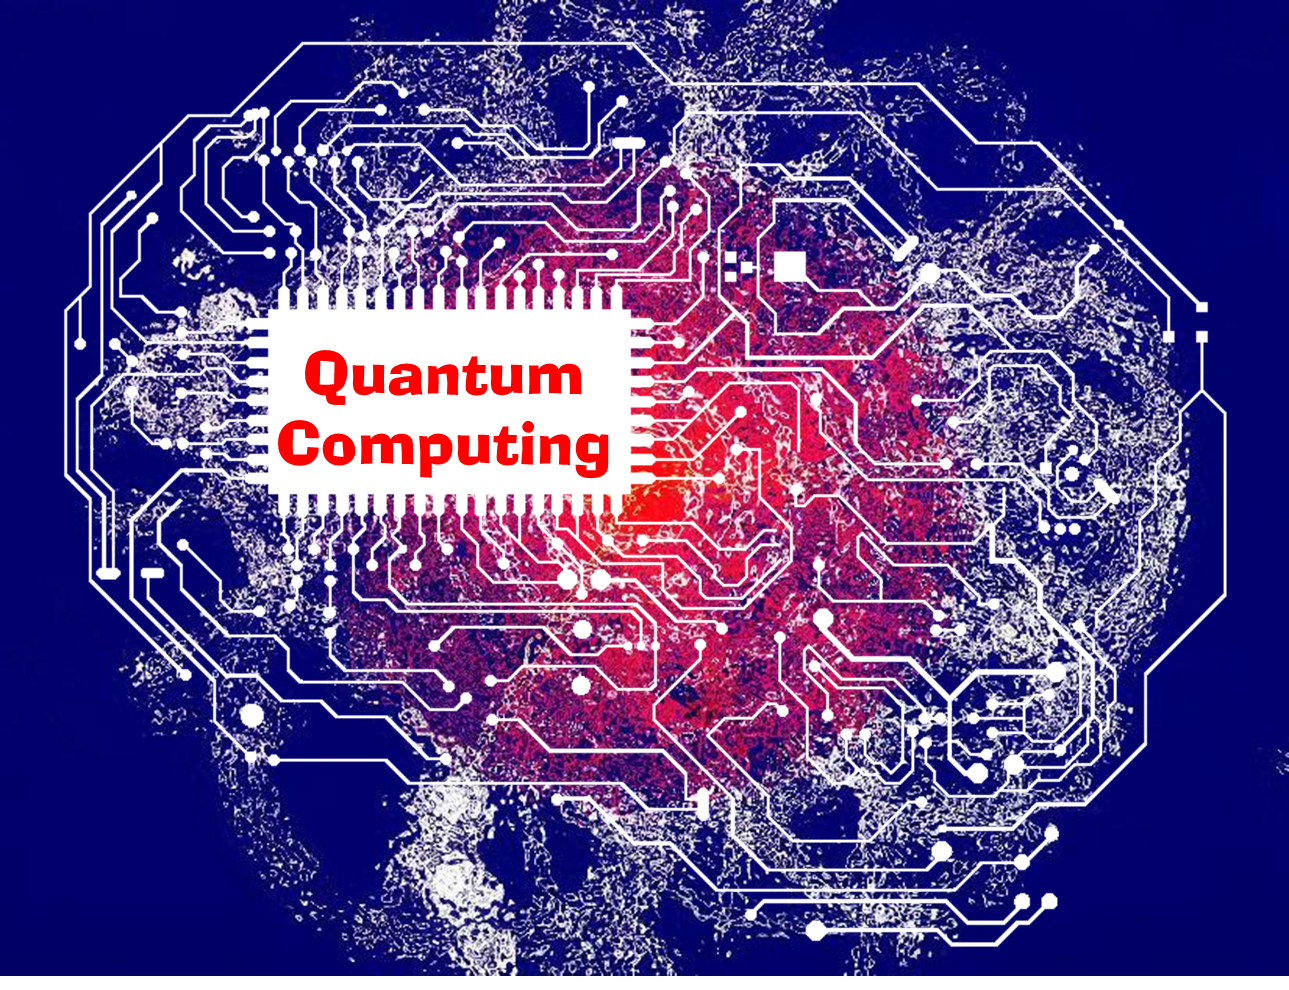 Researchers Show Classical Computers Can Keep up with, and Surpass, Their Quantum Counterparts